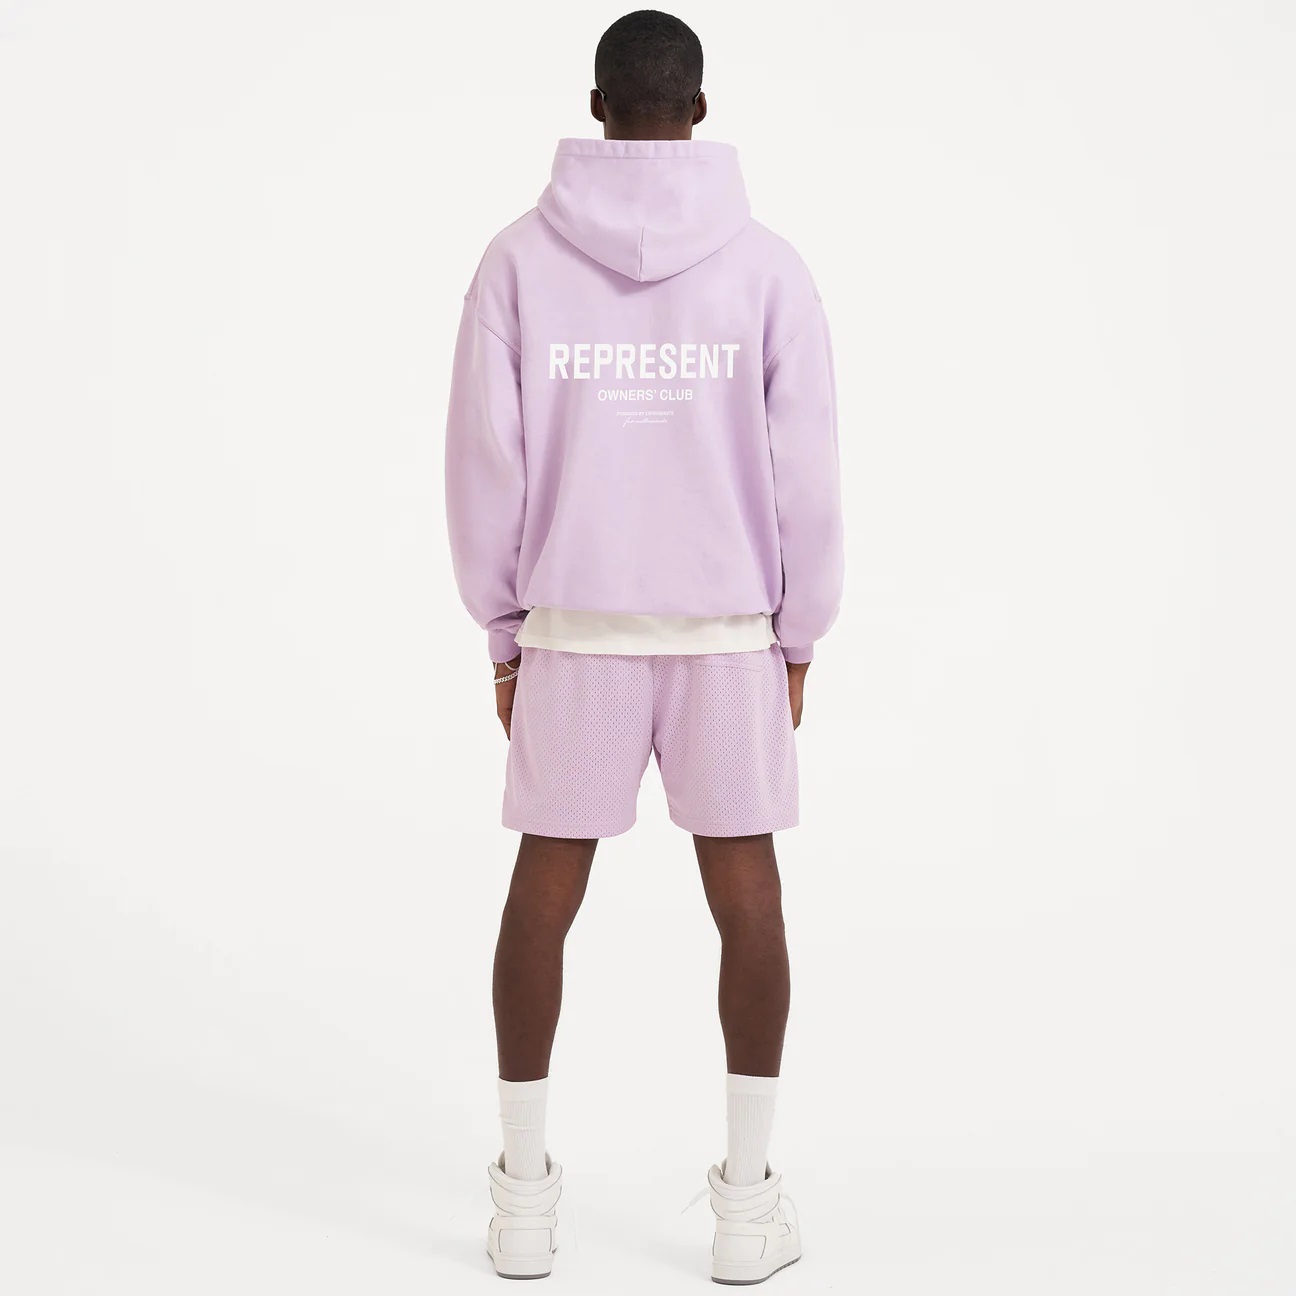 REPRESENT Owners Club Hoodie in Pastel Lilac XXL